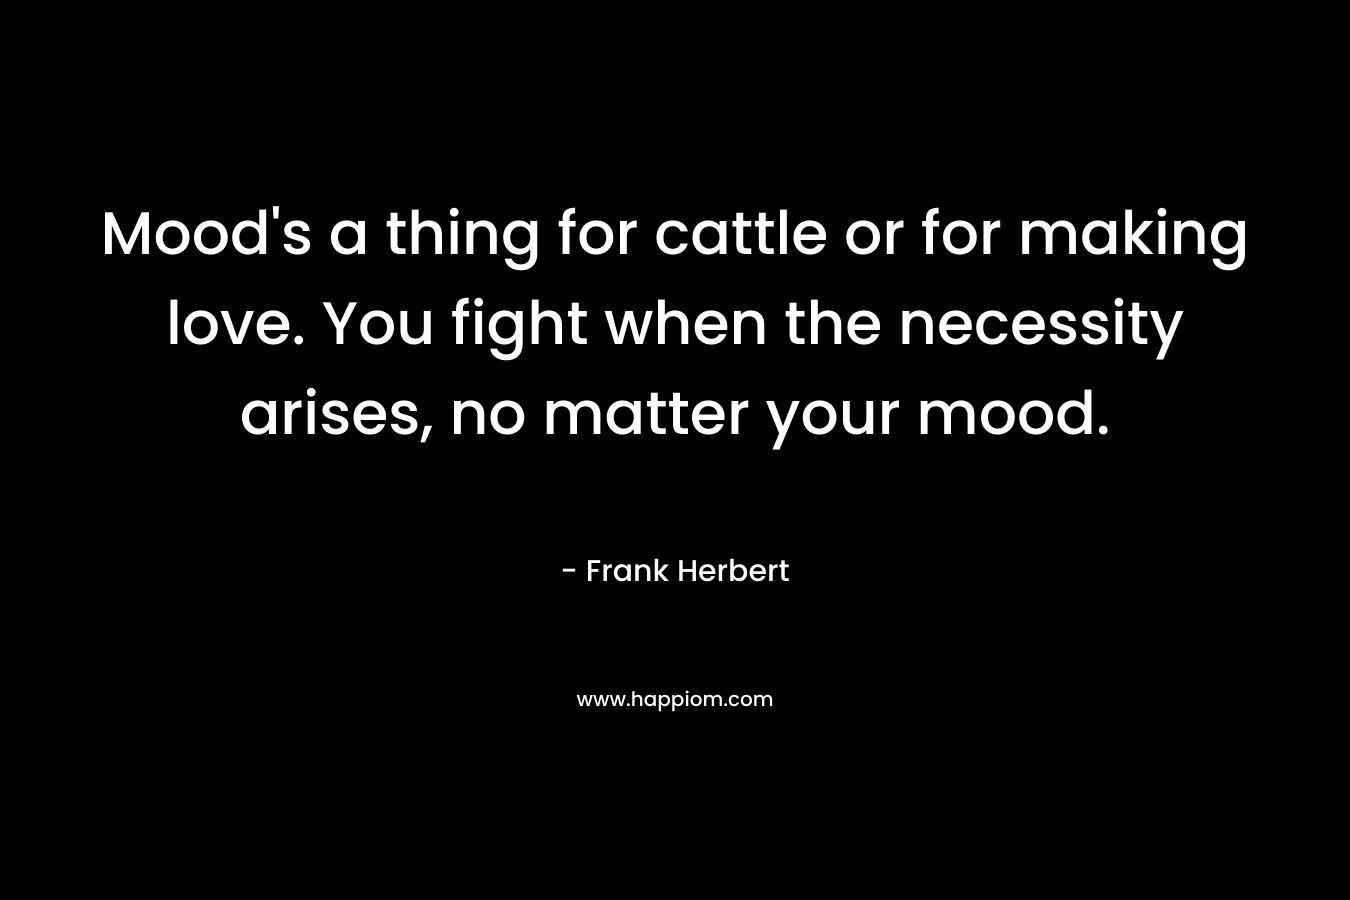 Mood’s a thing for cattle or for making love. You fight when the necessity arises, no matter your mood. – Frank Herbert